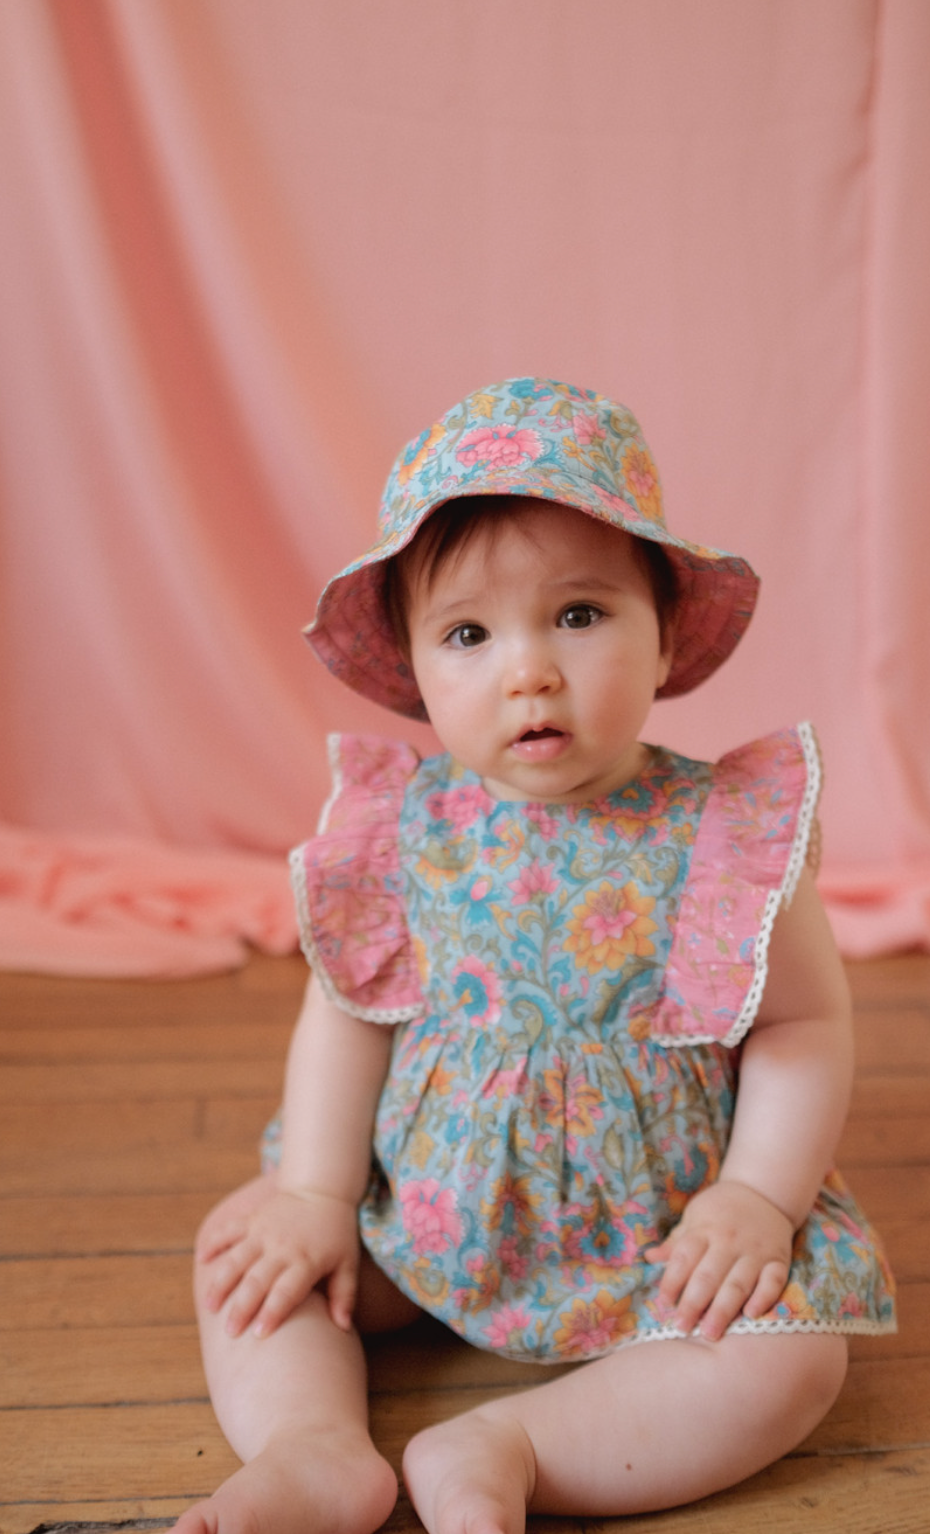 A reversible summer sun hat with a different print on each side. Made with 100% organic cotton. Louise misha lajik sun hat in water river flowers.